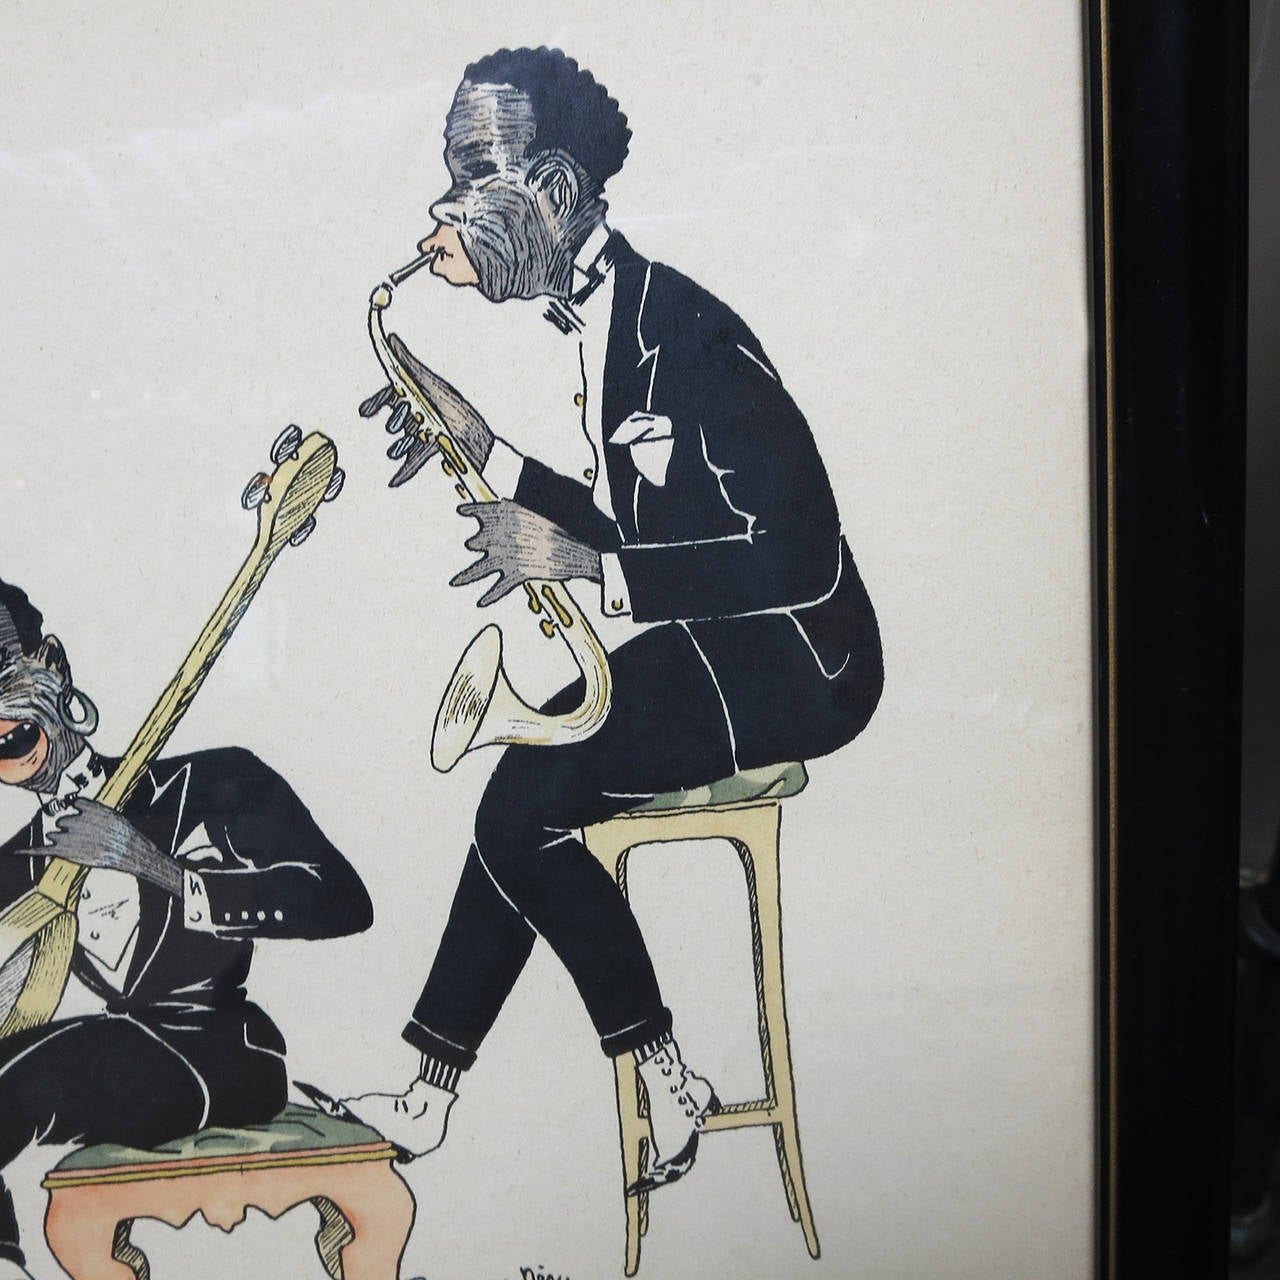 American Watercolor and Ink Art Deco Jazz Band by Raymond Niry